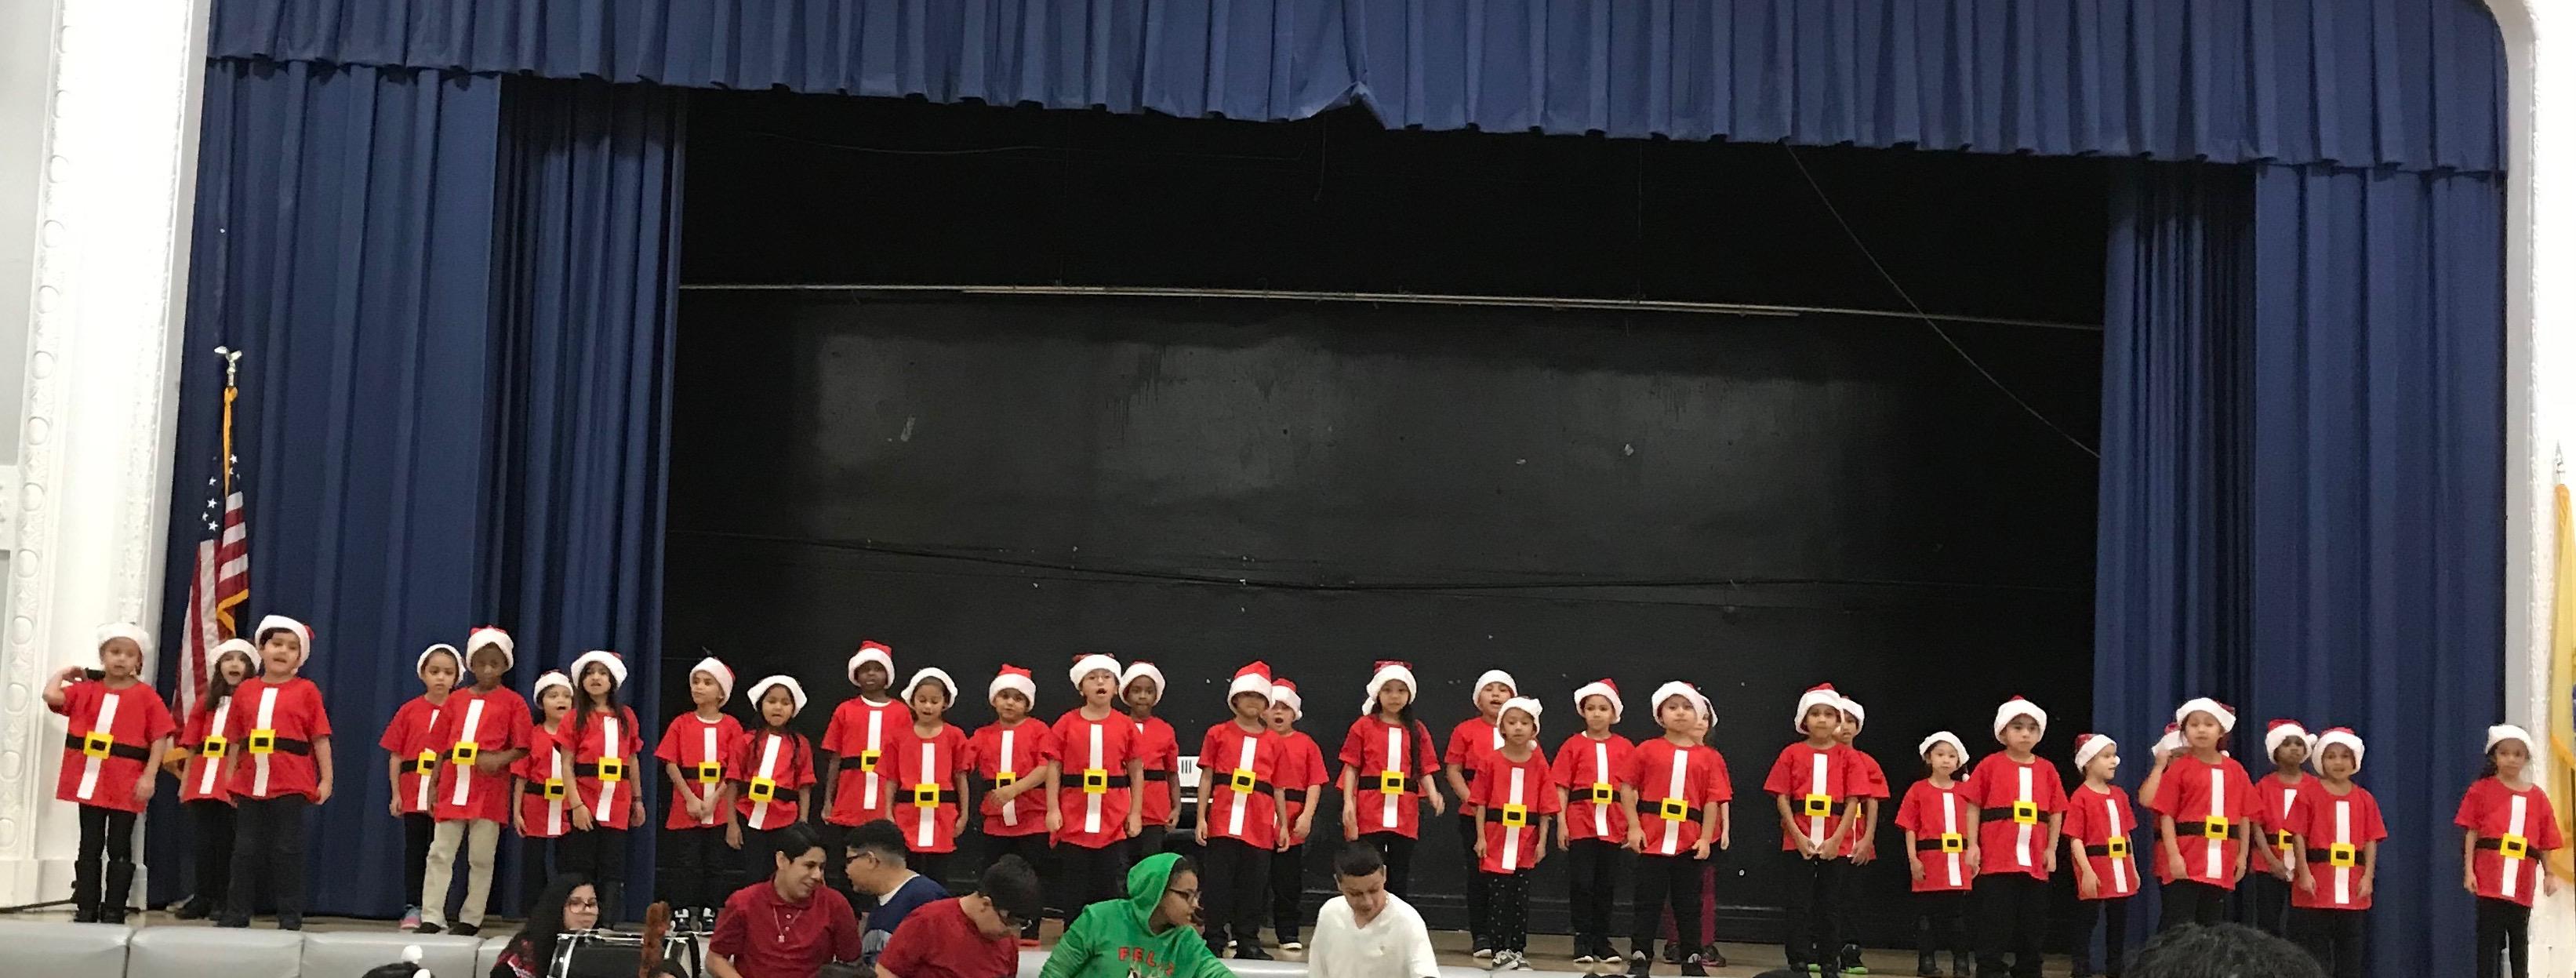 children on stage dressed as Santa's helpers signing